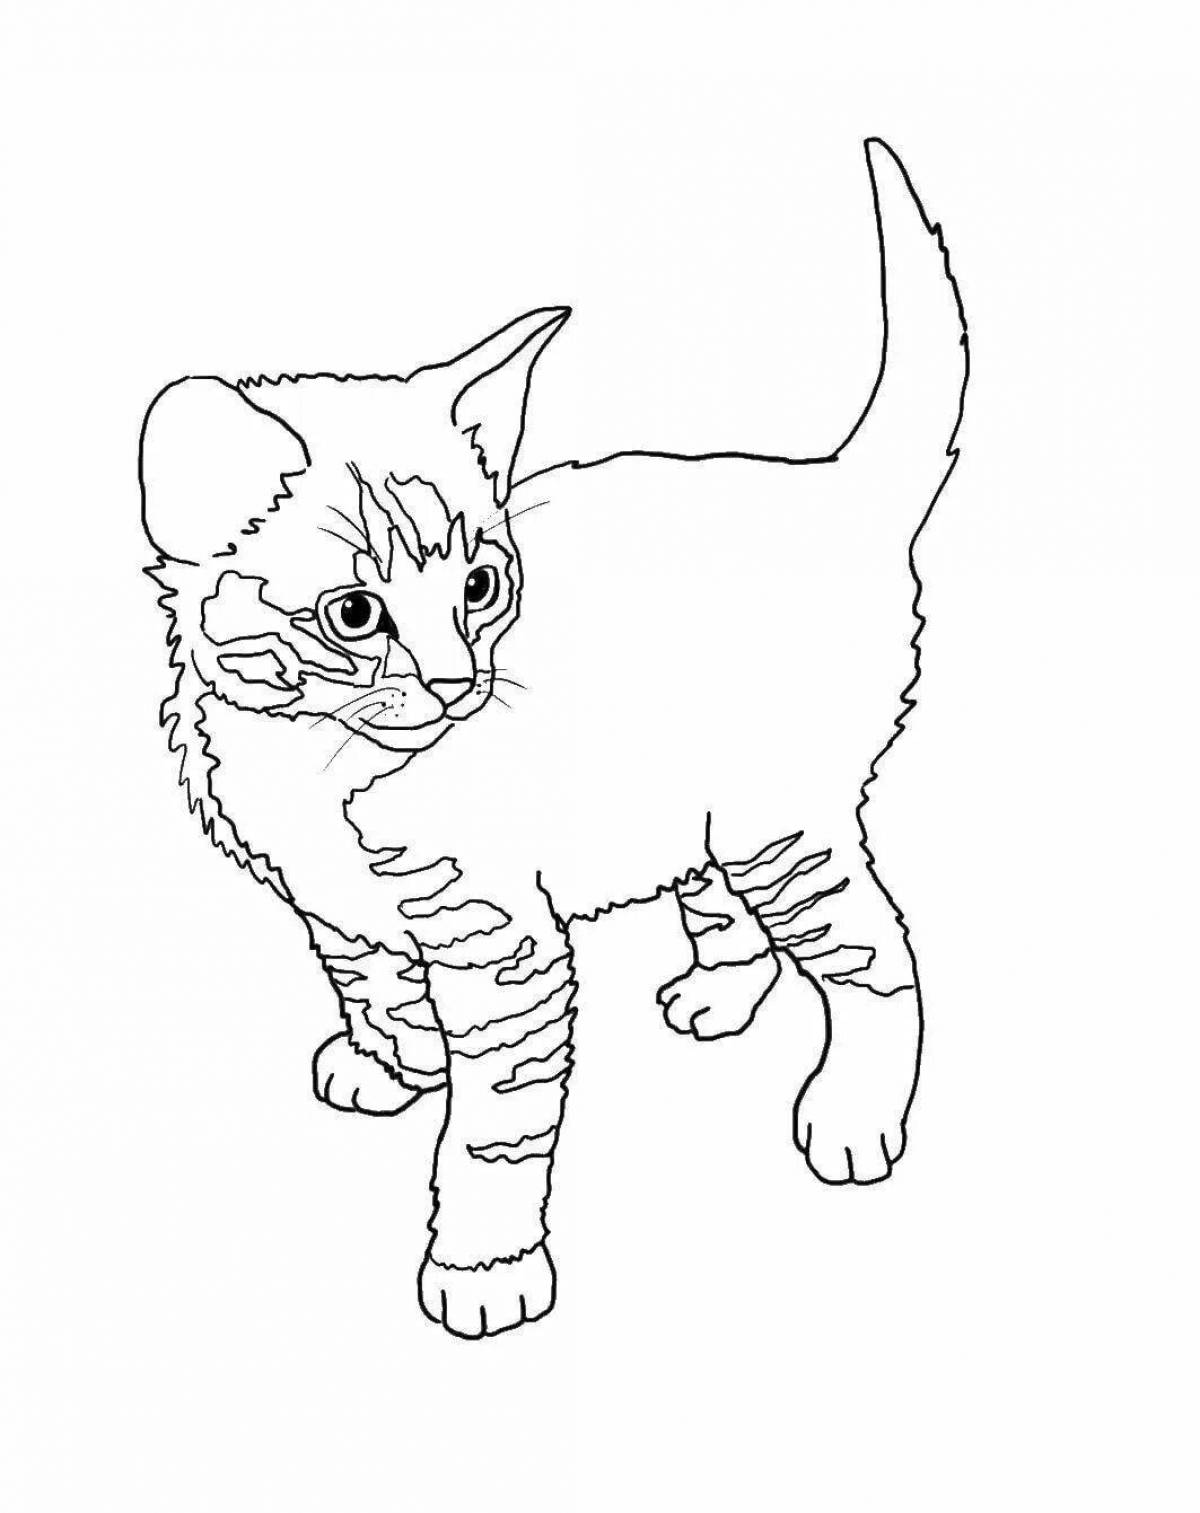 Adorable kitty coloring book for kids 6-7 years old